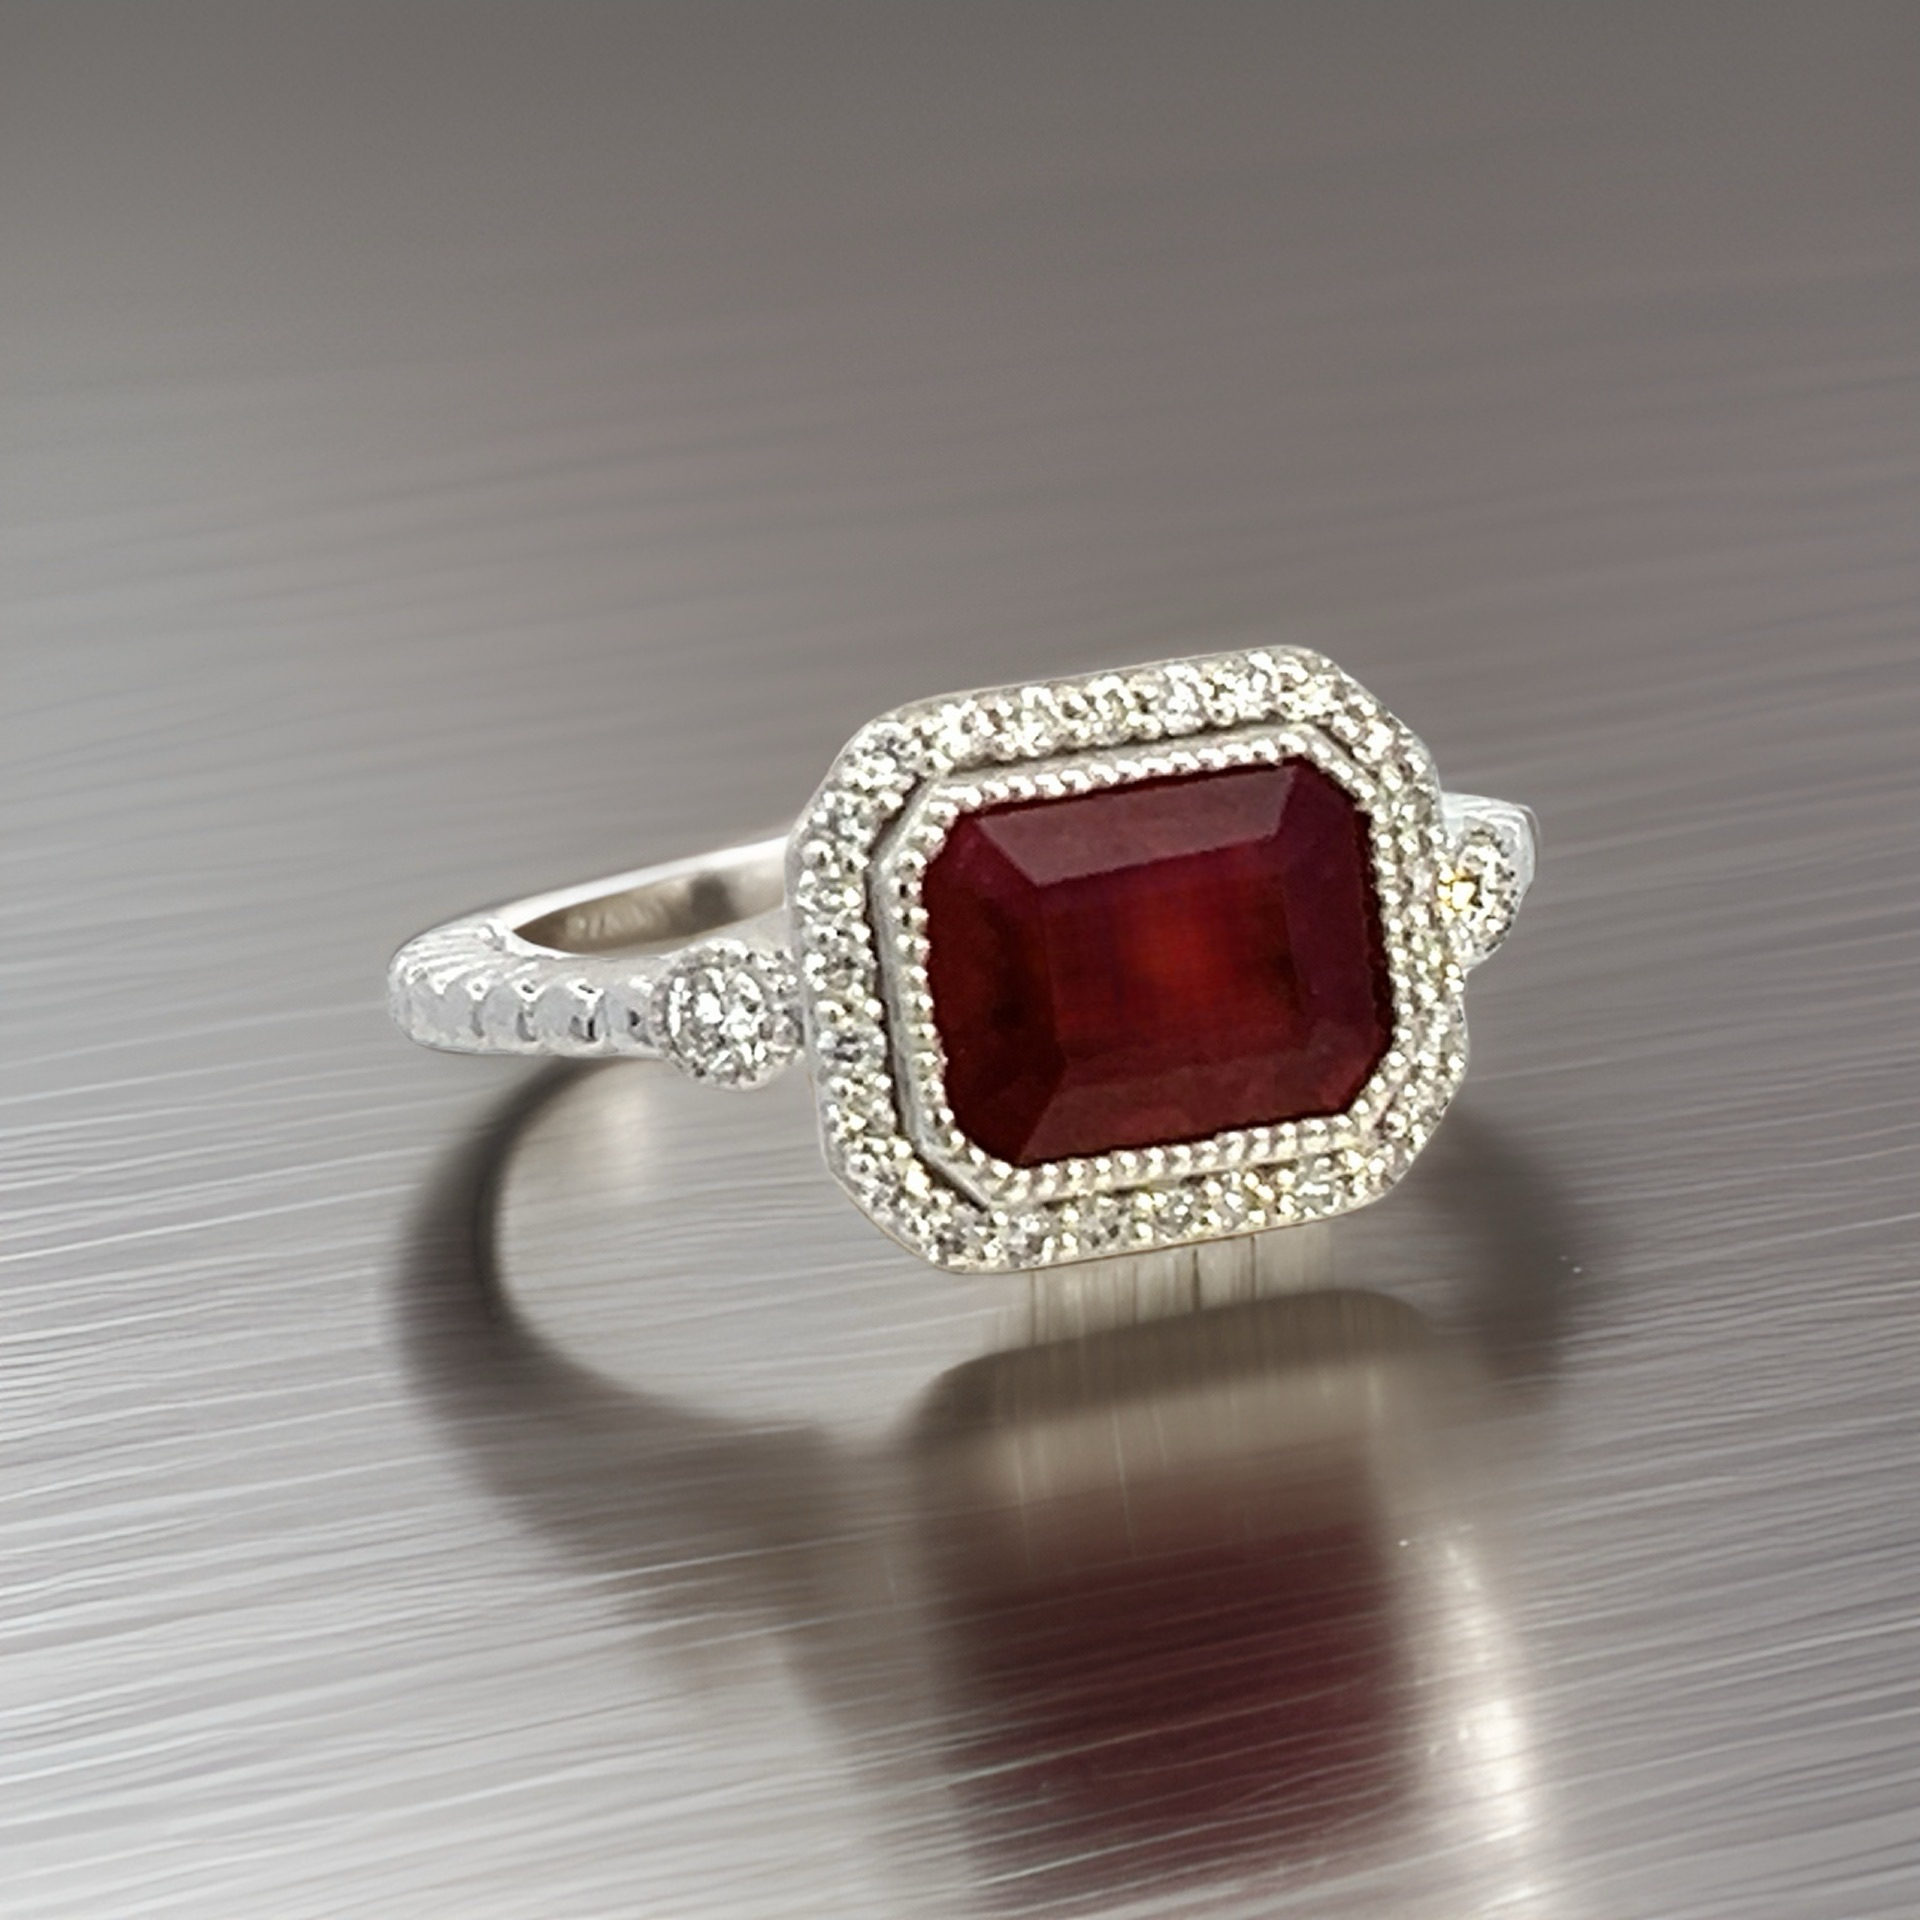 Natural Ruby and White Sapphire Ring 6.5 14k W Gold 2.46 TCW Certified $3,950 310638